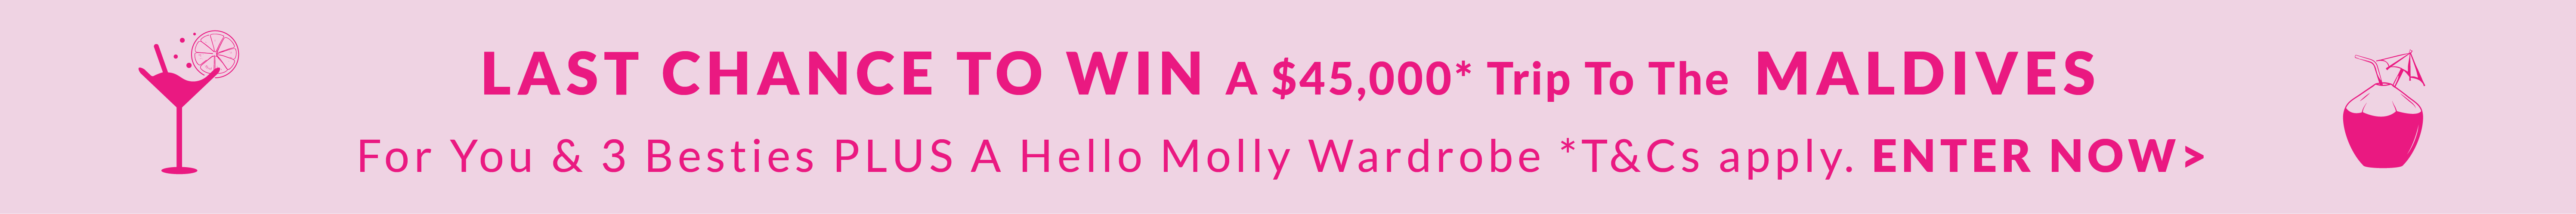 LAST CHANCE TO WIN A $45,000 TRIP TO THE MALDIVES FOR YOU & 3 BESTIES PLUS A HELLO MOLLY WARDROBE